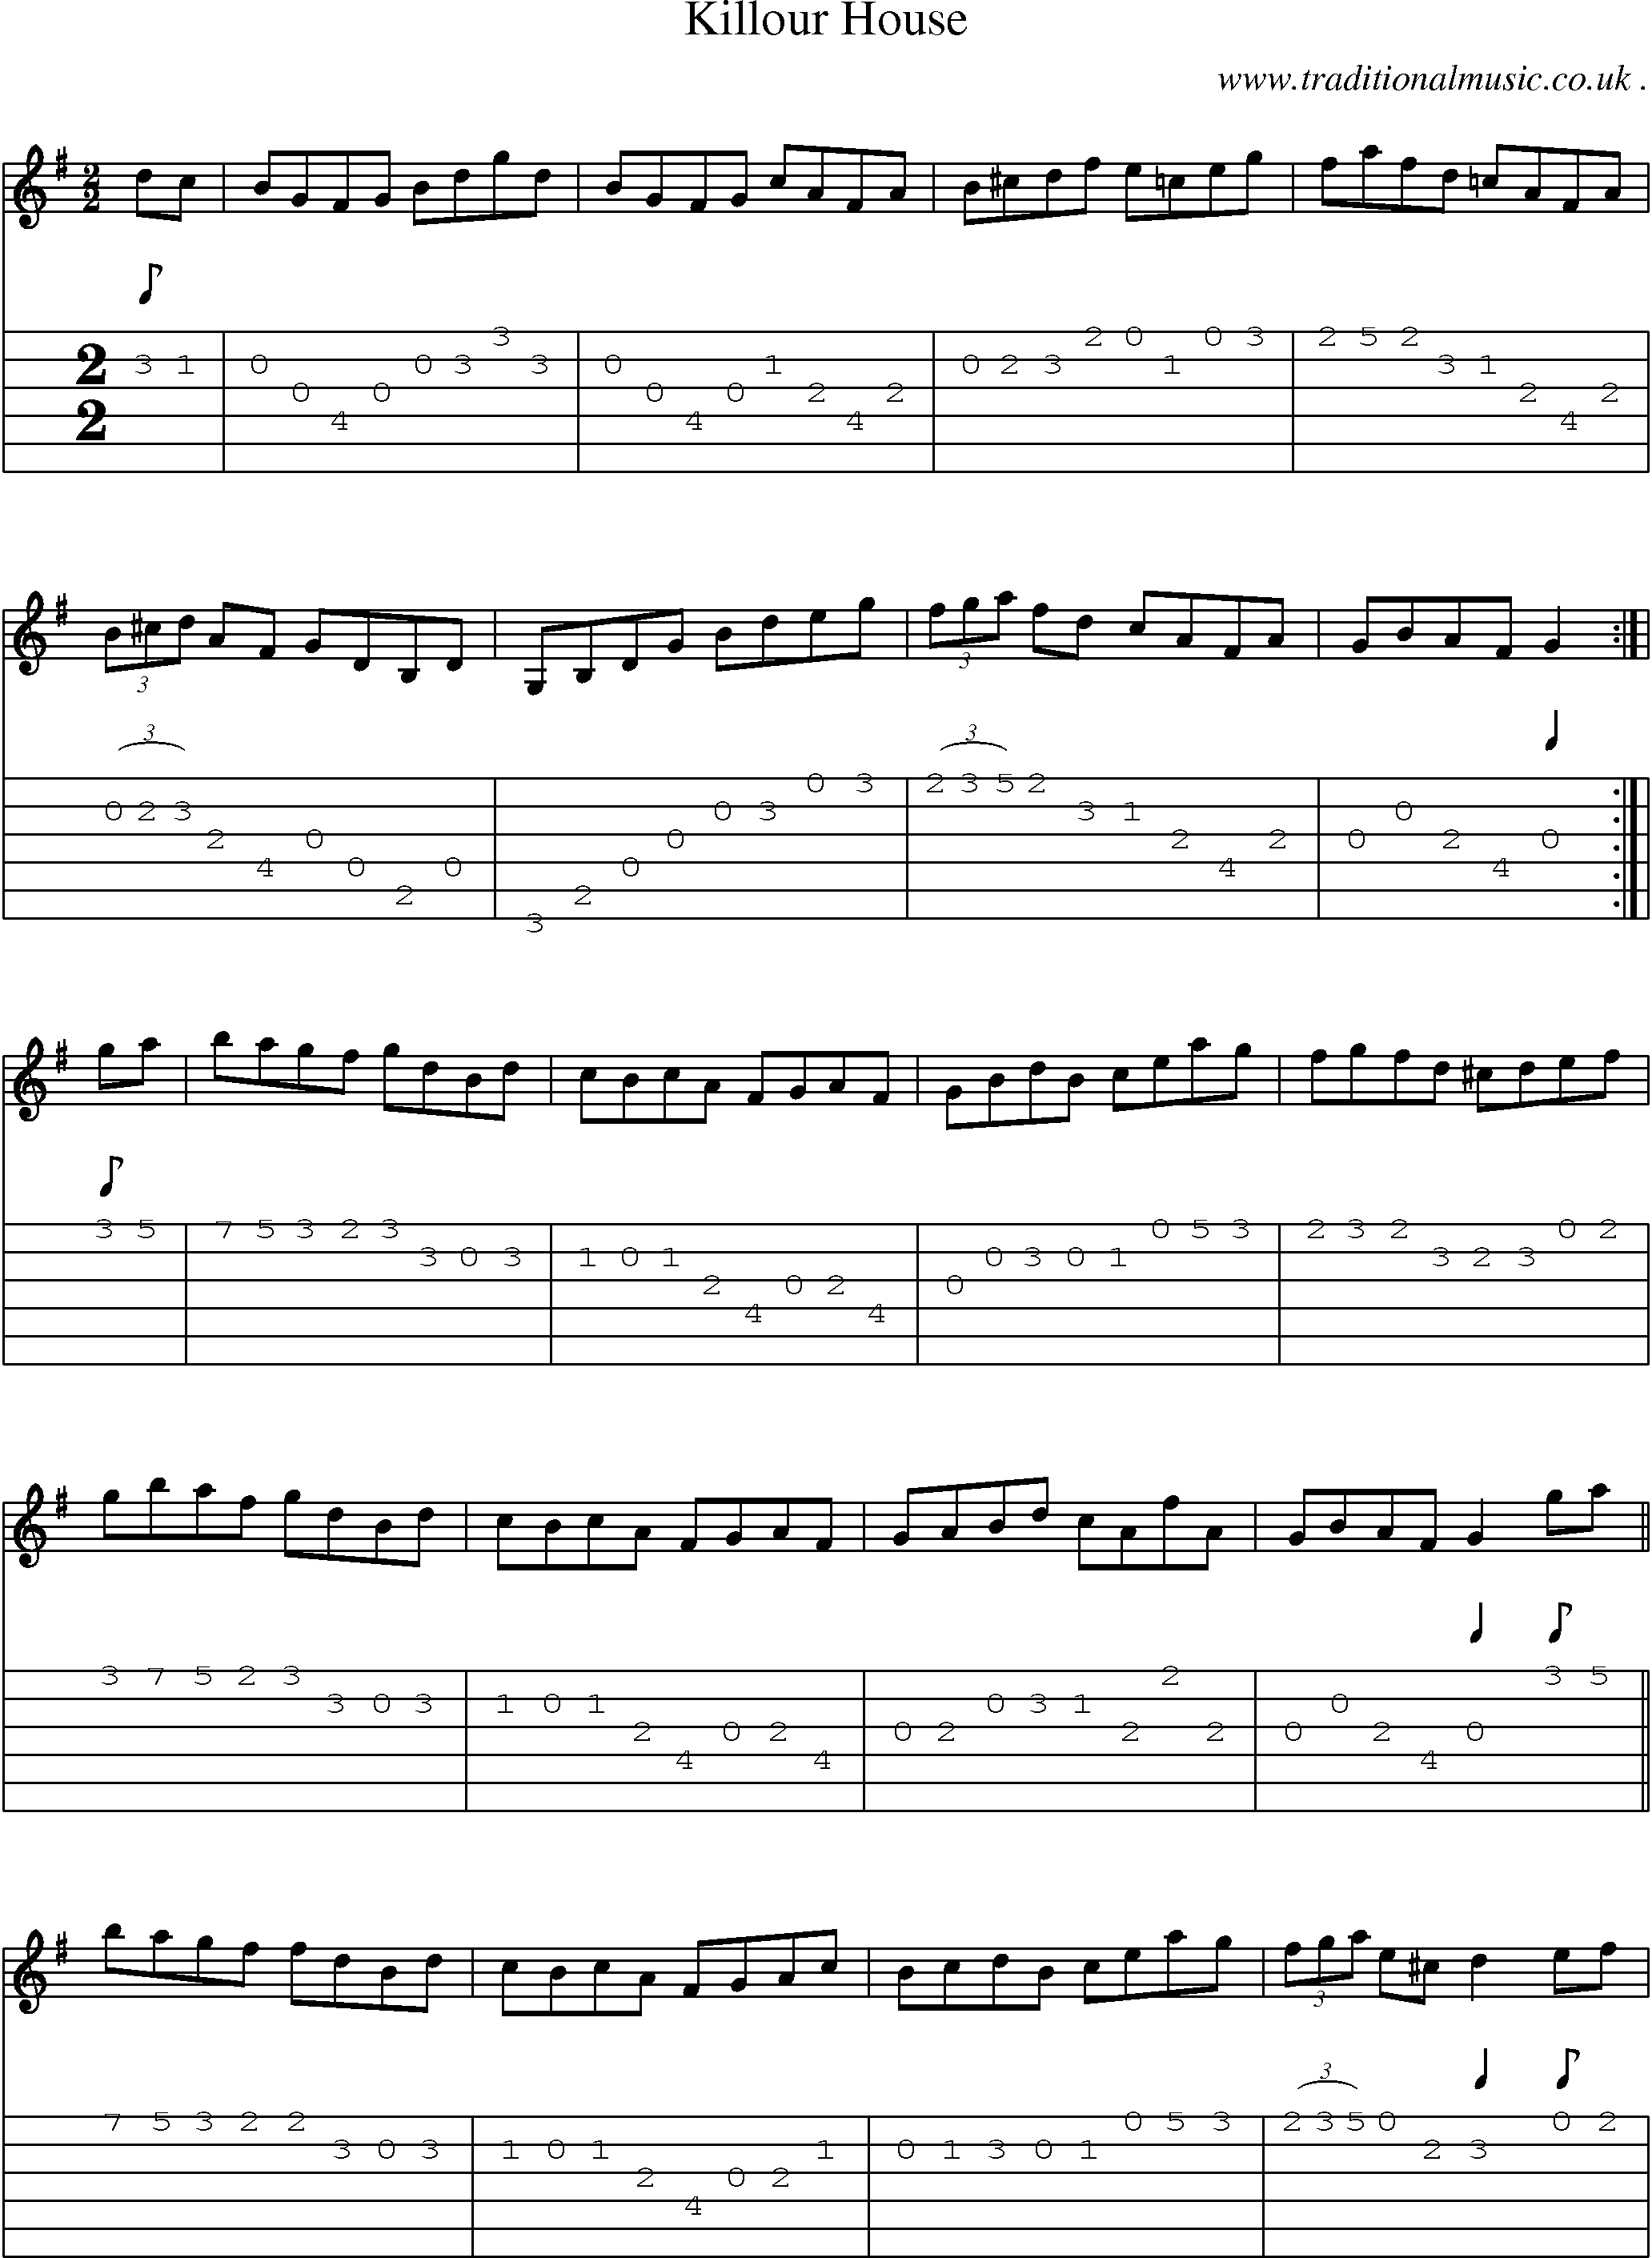 Sheet-Music and Guitar Tabs for Killour House